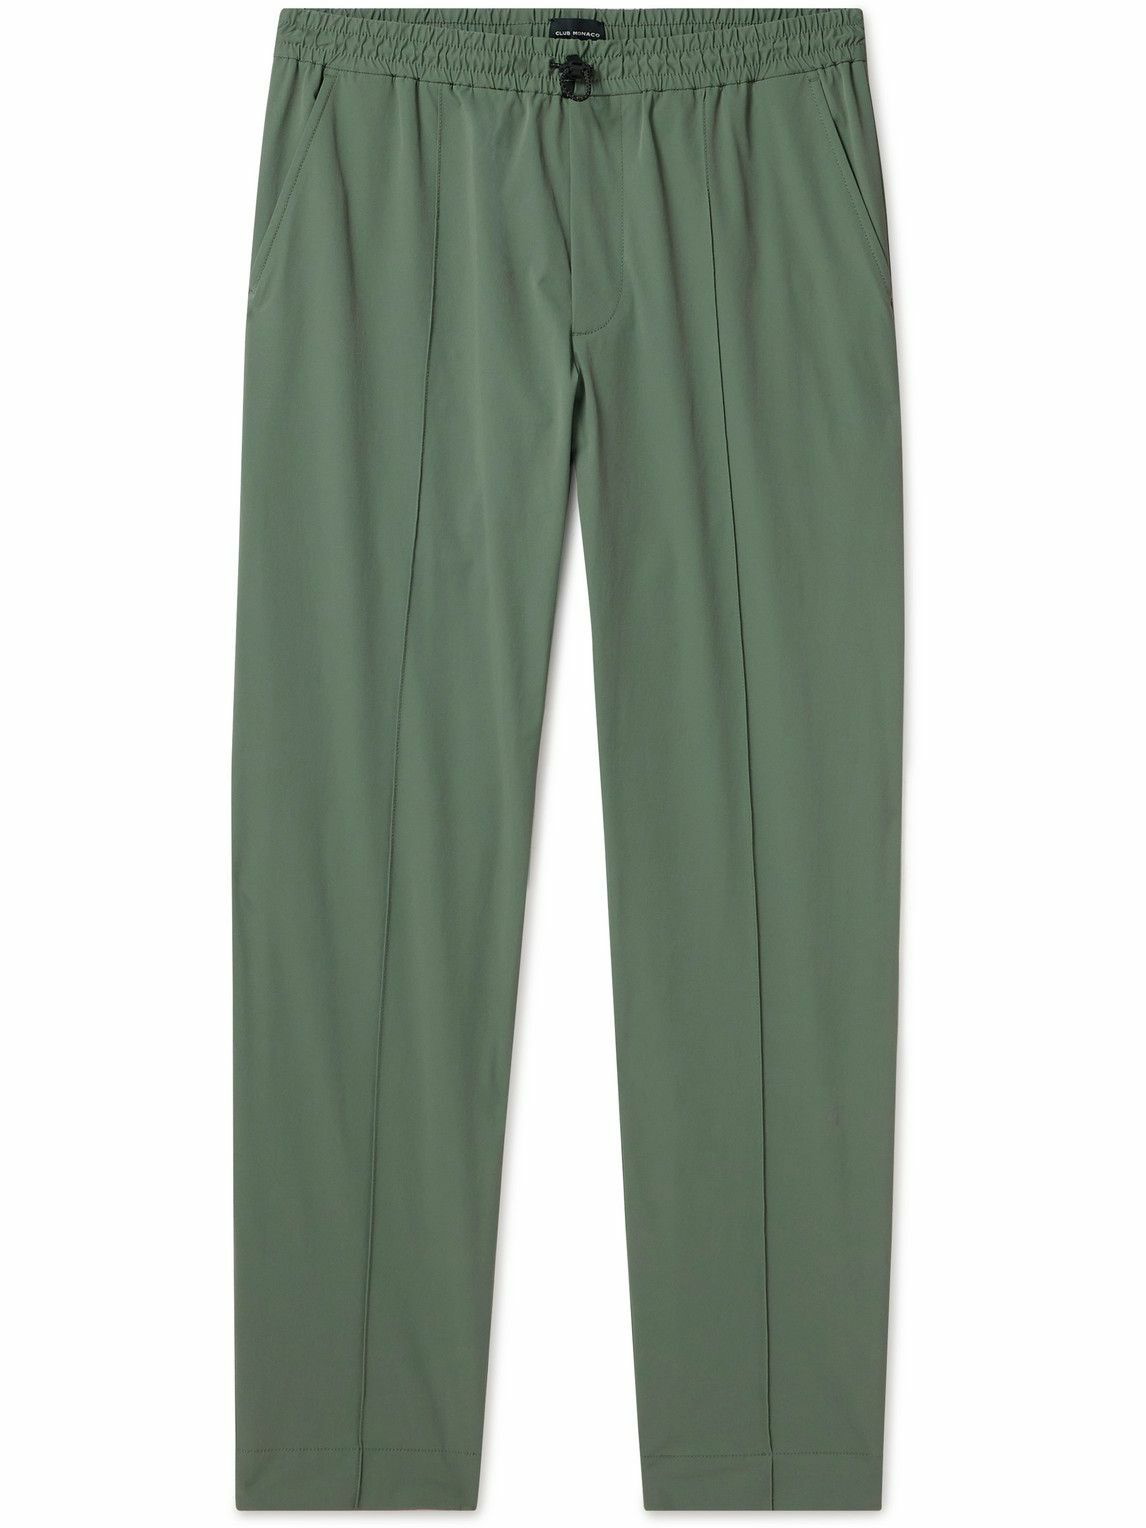 These Women's Palazzo Pants Are Perfect for Travel